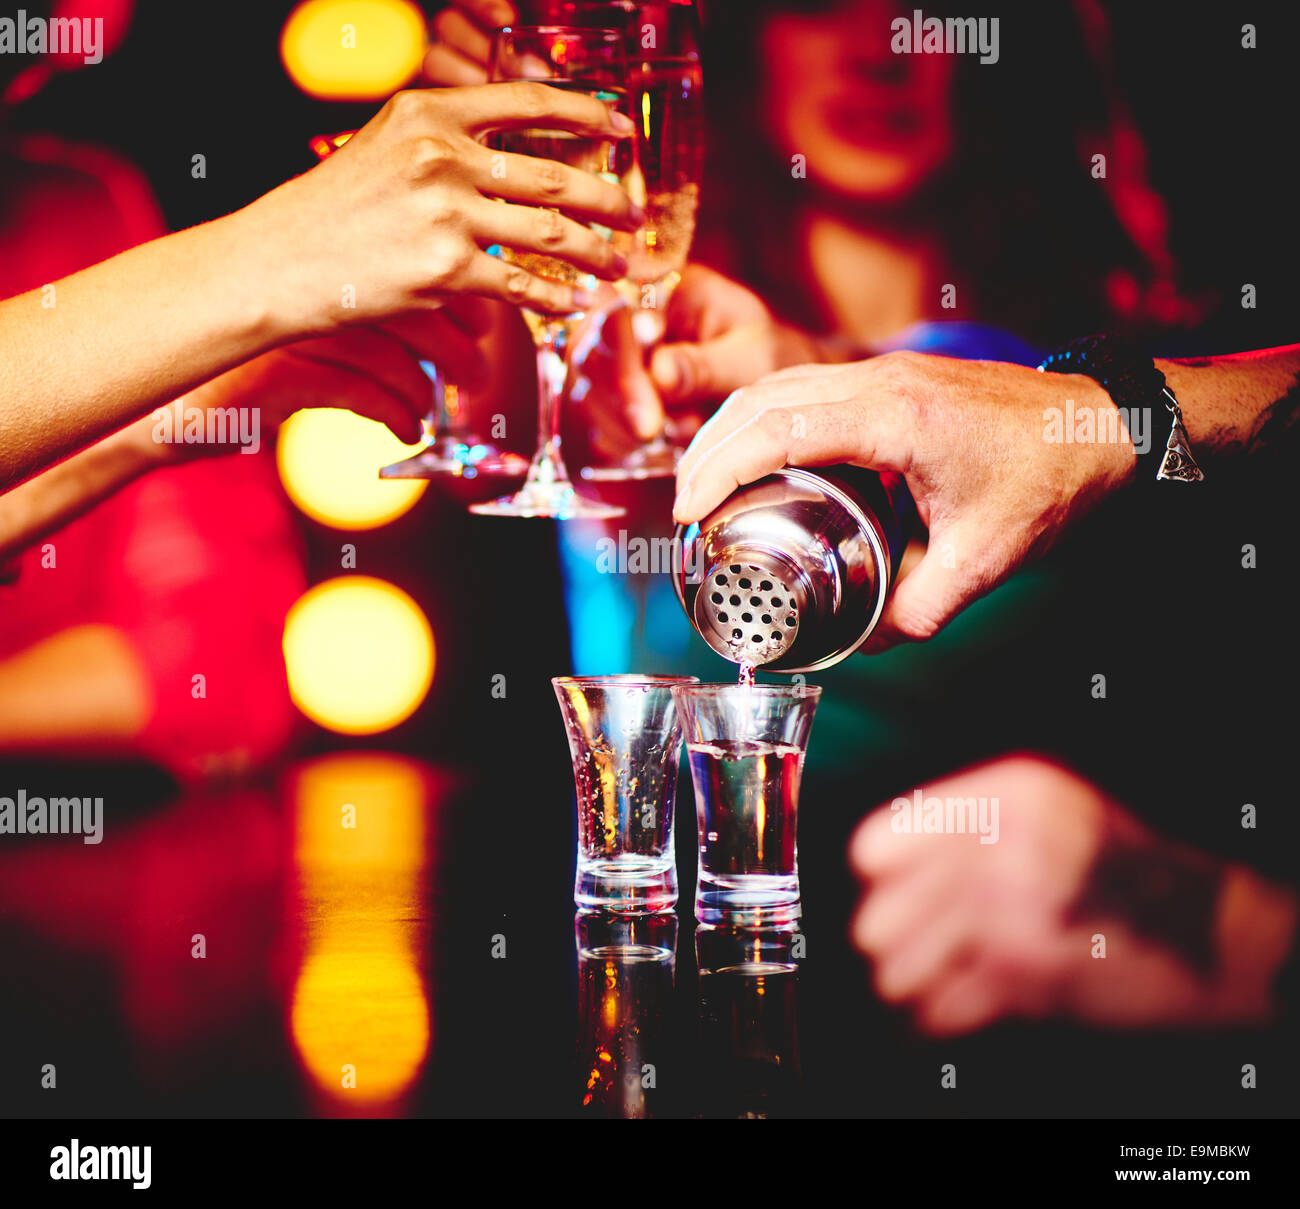 Hand of barman pouring drink into glasses in the bar Stock Photo